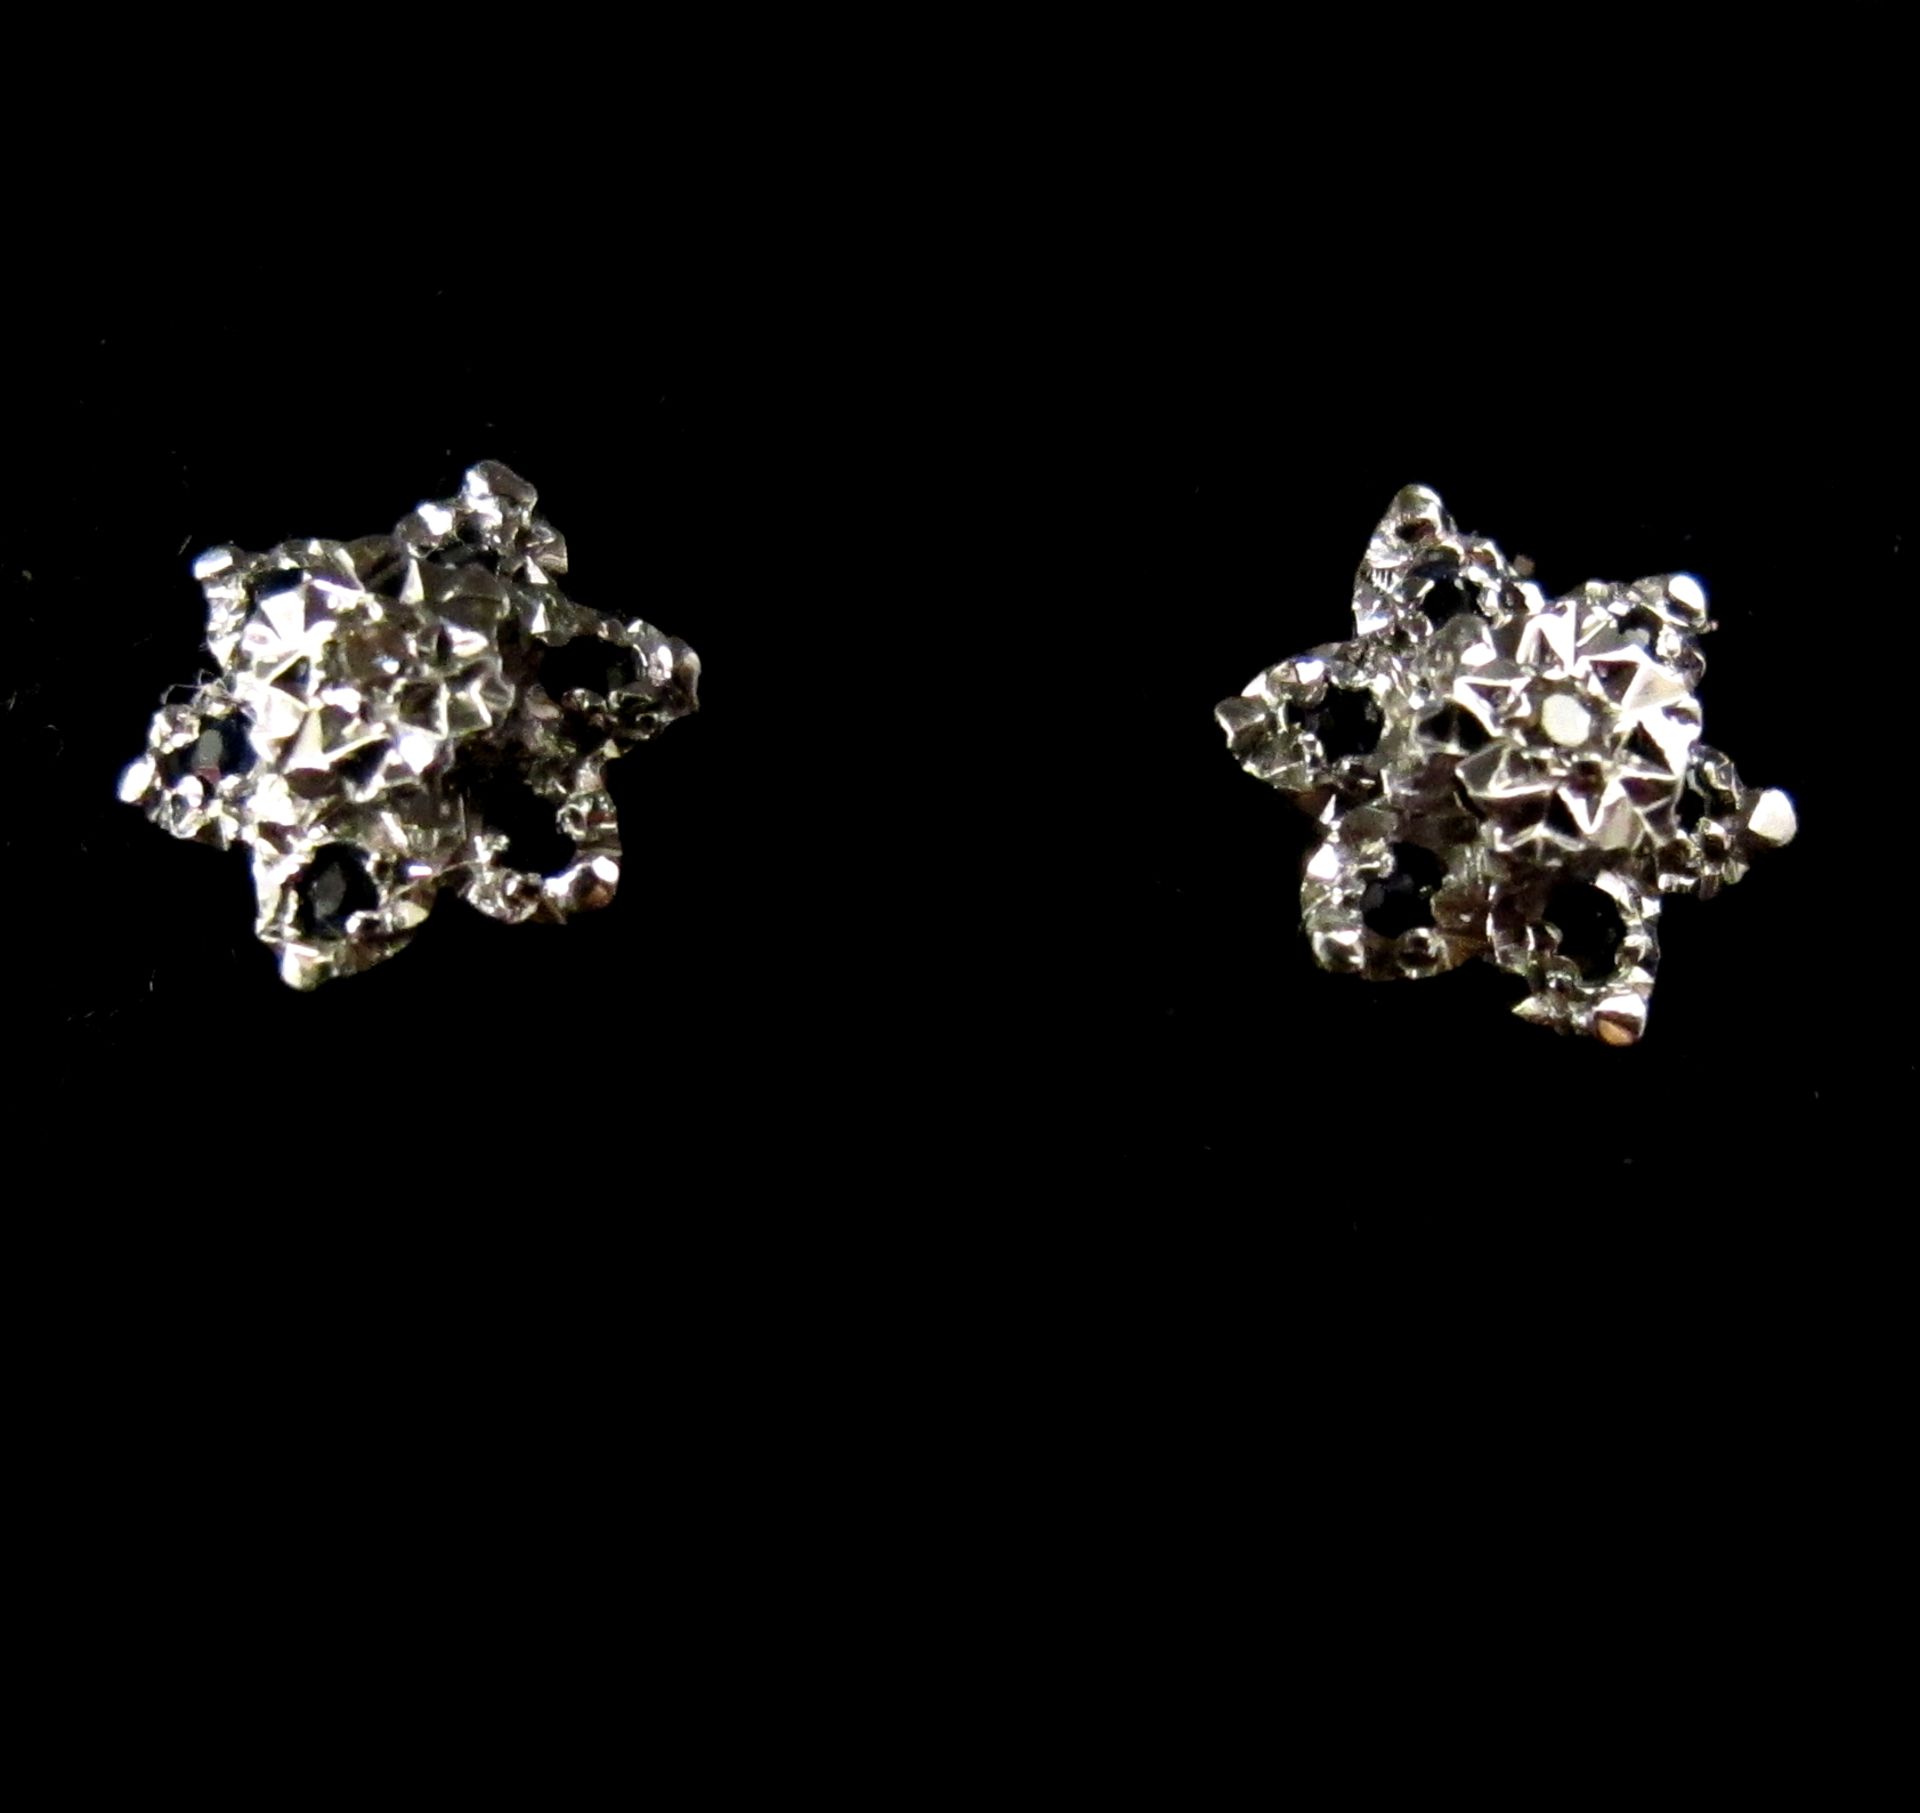 Pair of 9ct gold, diamond and sapphire stud earrings (est £30-£60) - Image 2 of 2